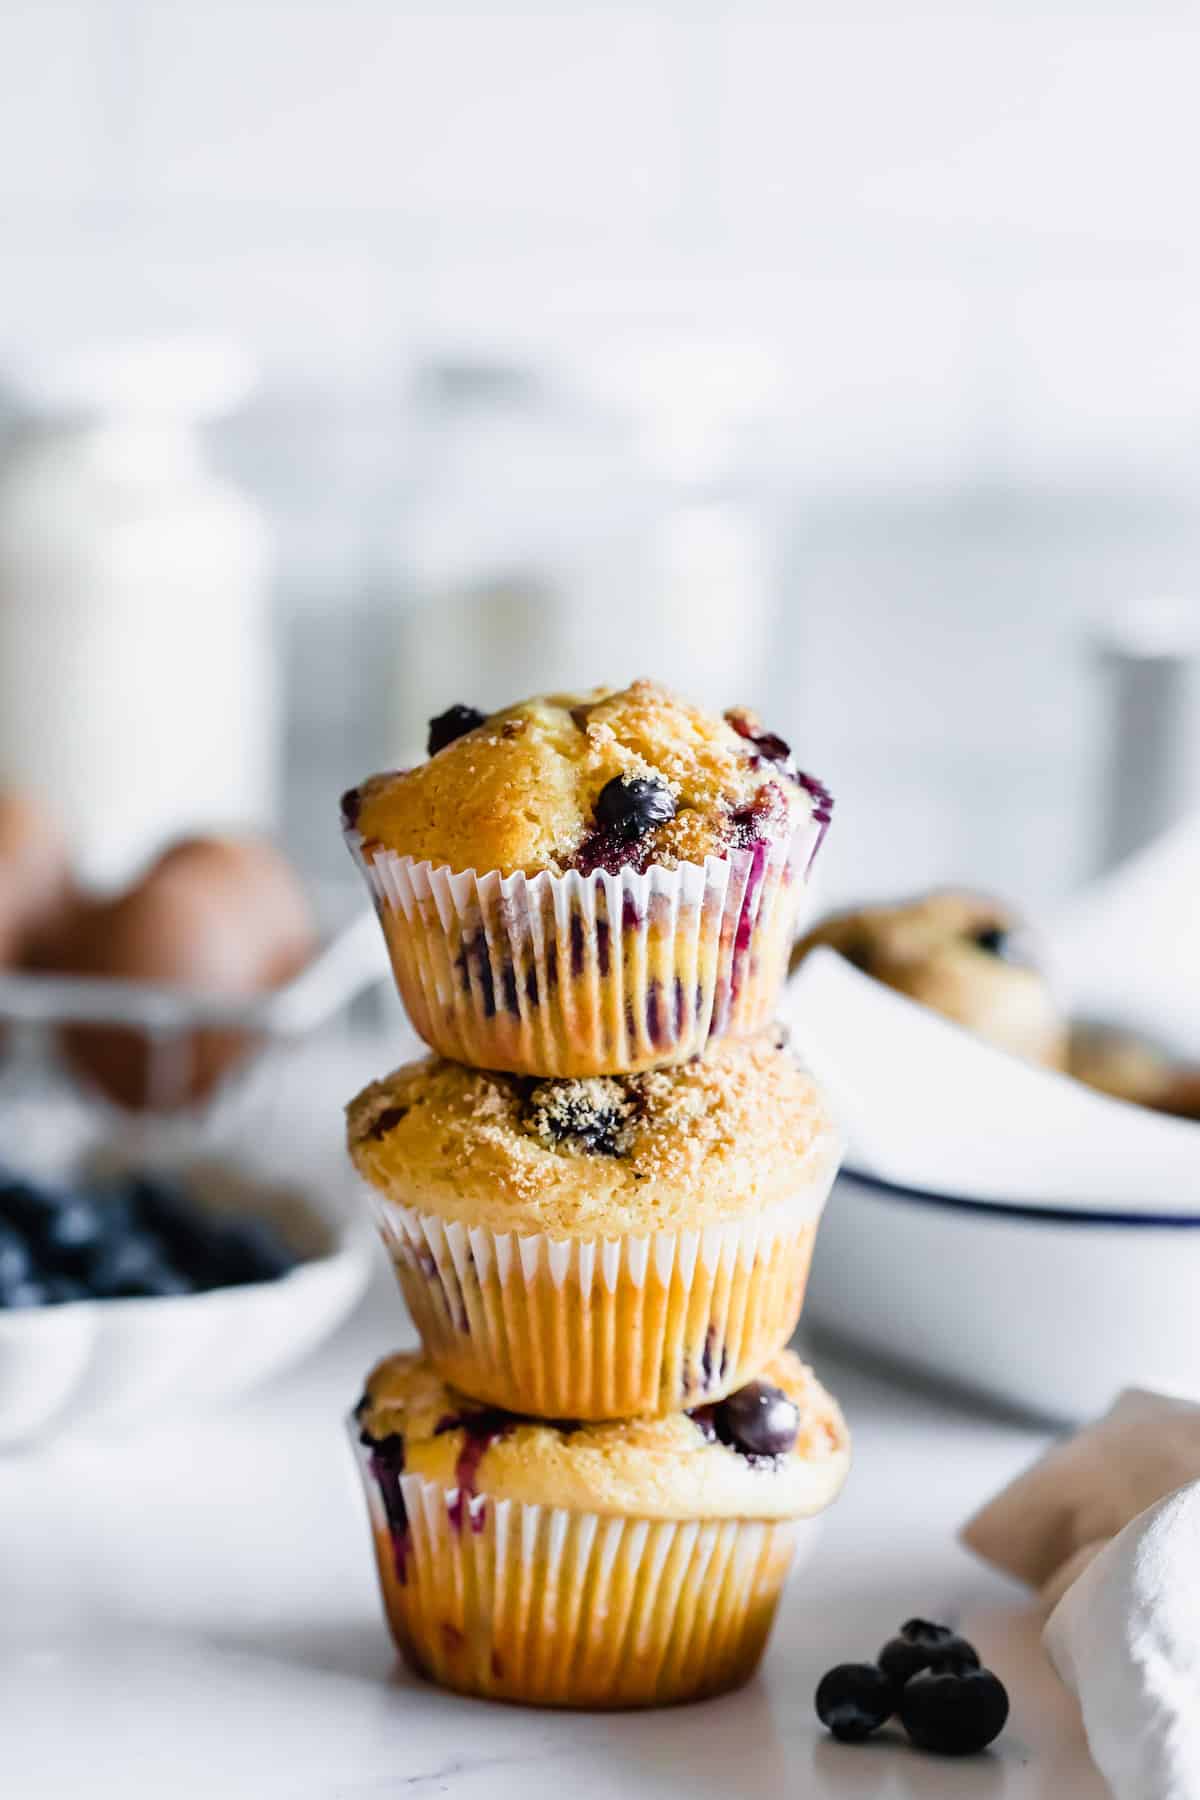 Three Blueberry Muffins Stacked on a White Marble Countertop